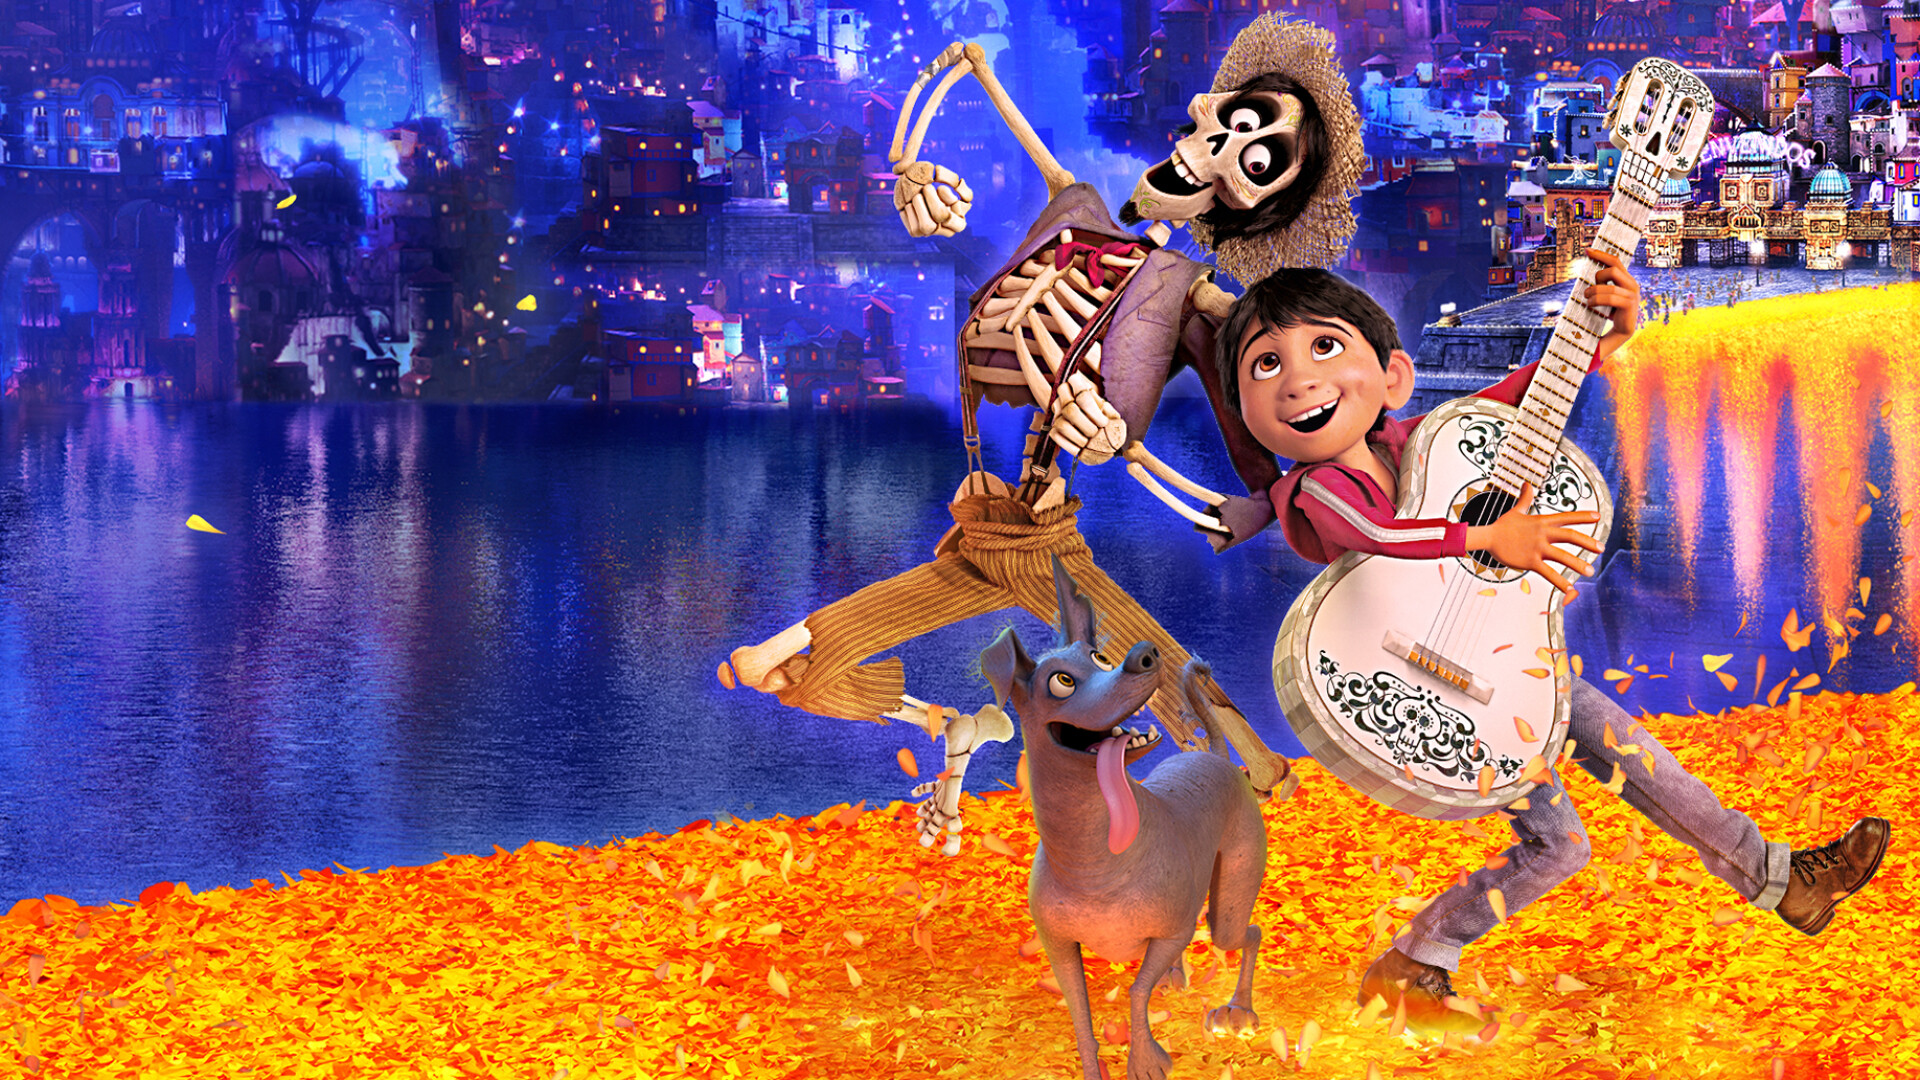 Coco (Cartoon): Despite his family’s longstanding ban on music and the affection he holds for them, 12-year-old Miguel is desperate to play and can’t help but go against their wishes. 1920x1080 Full HD Background.